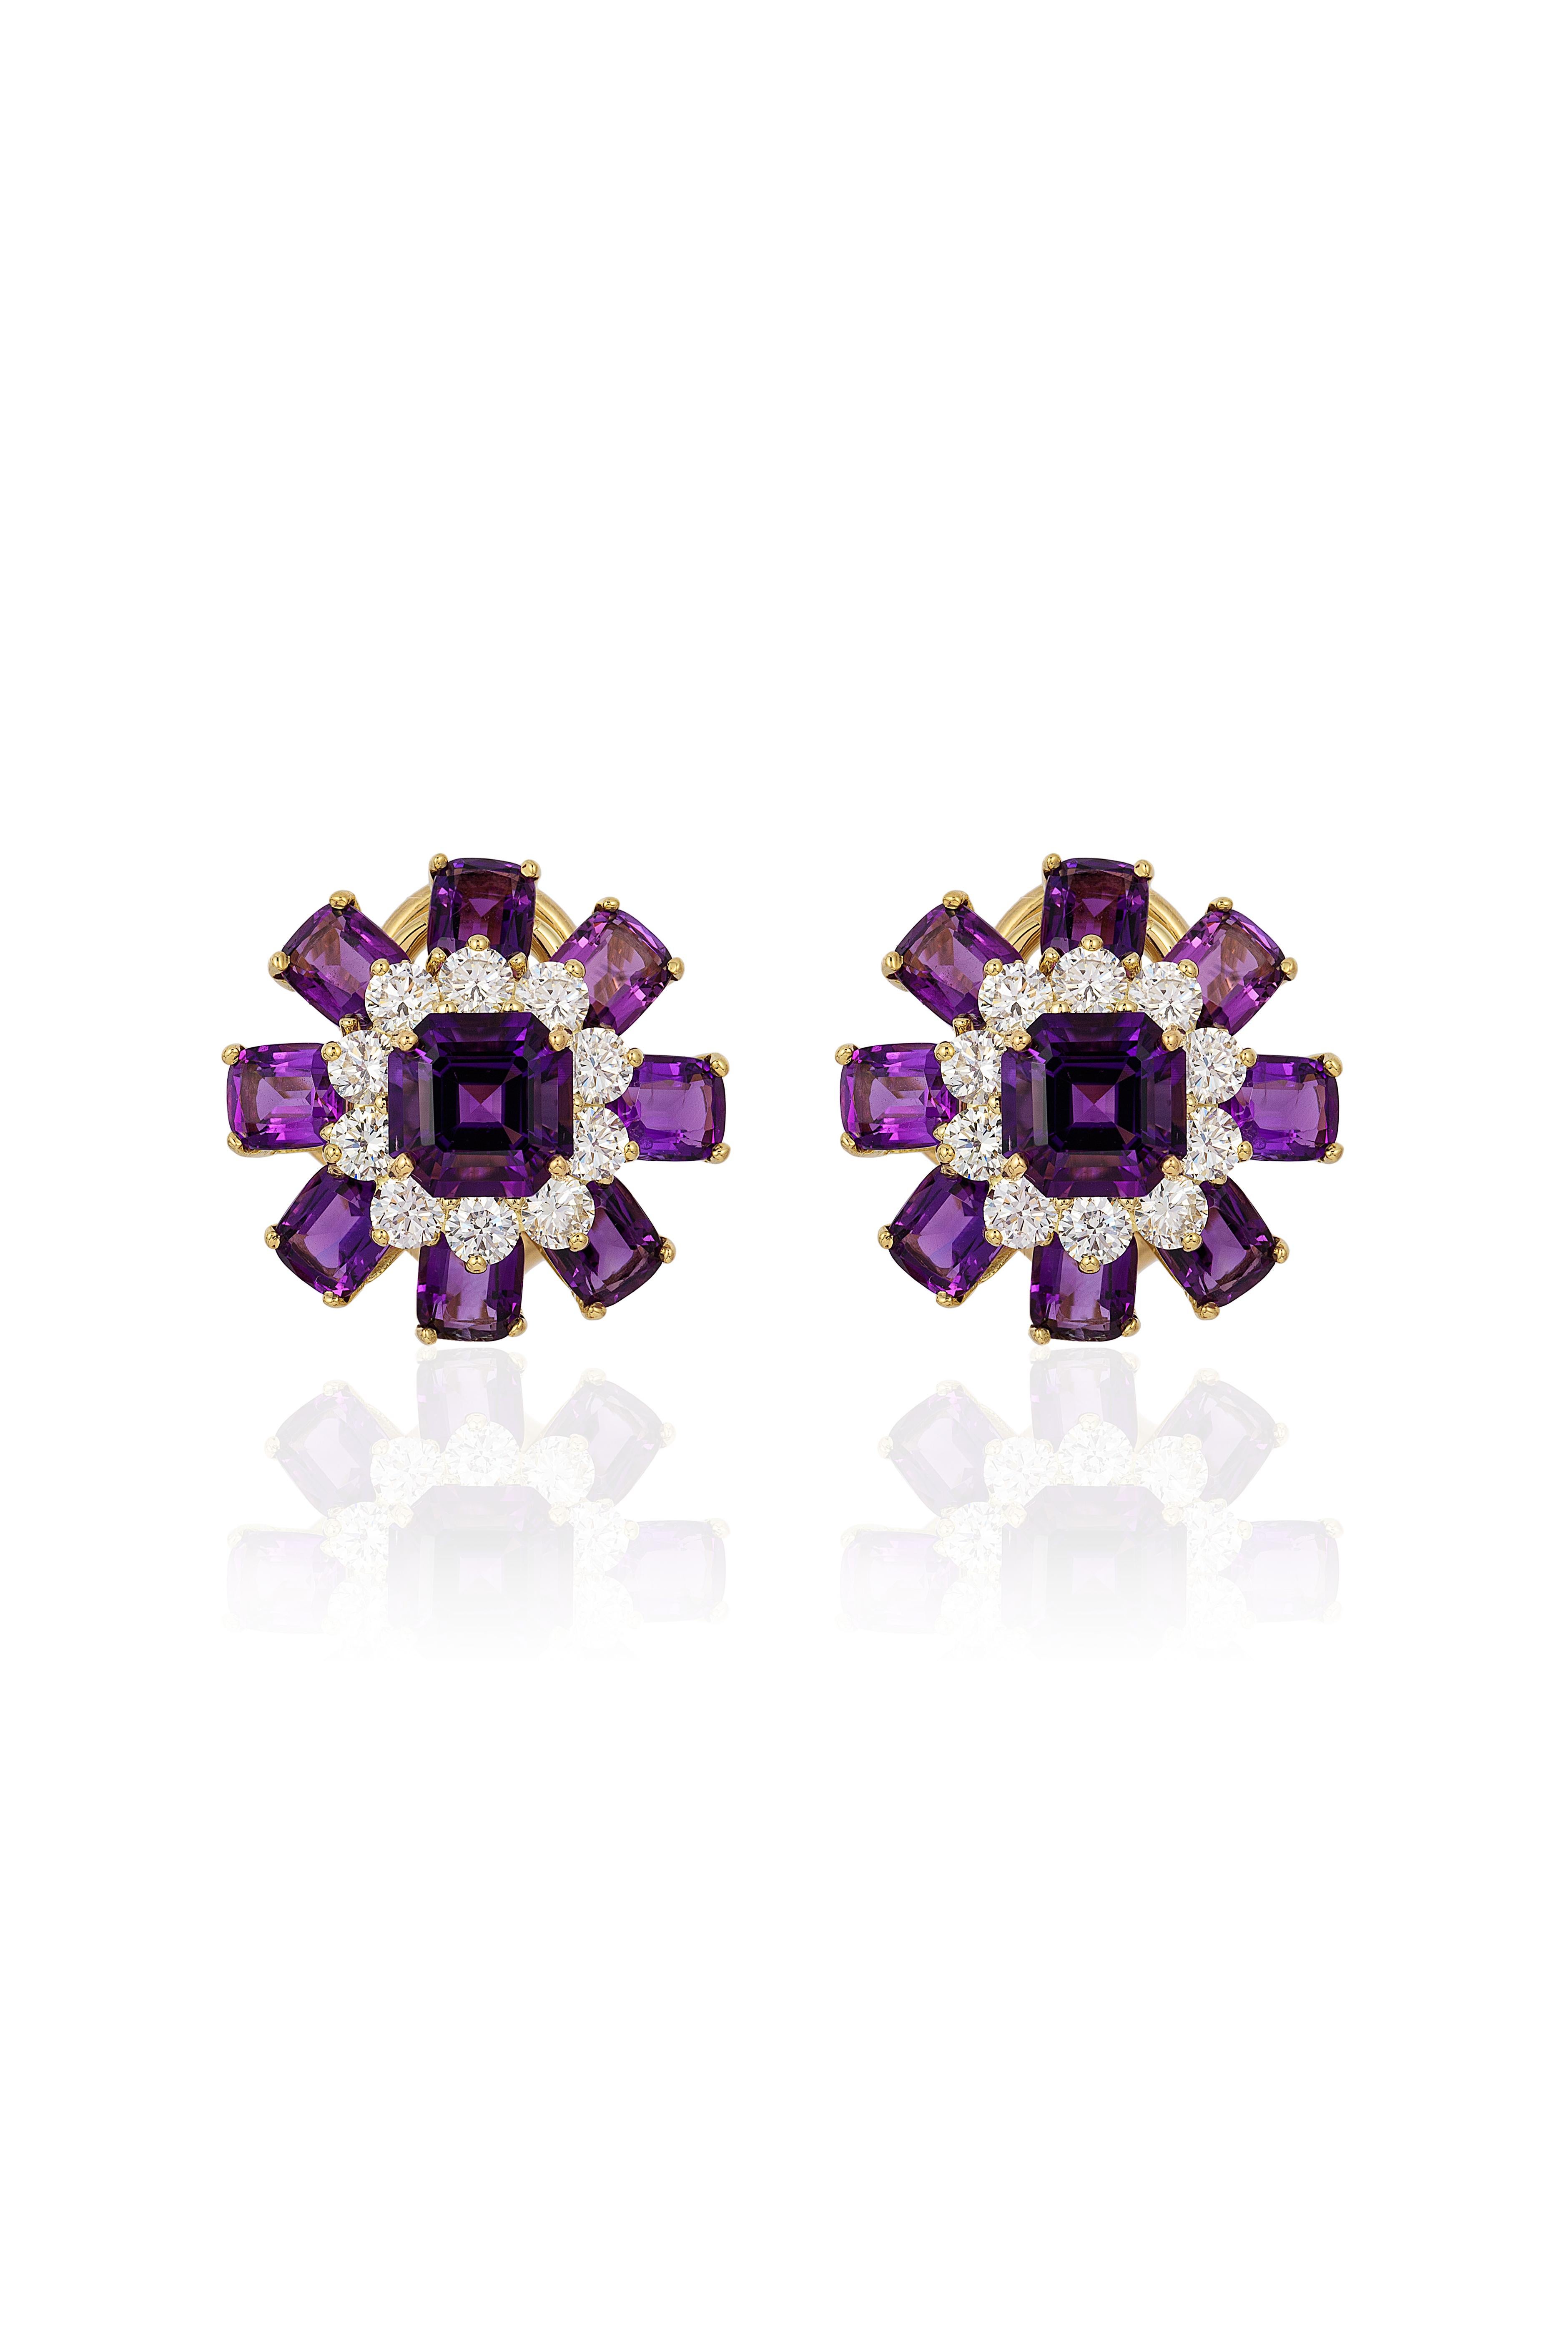 The Amethyst Asscher & Cushion Cut with Diamond Earrings in 18K Yellow Gold, part of the exquisite 'G-One' Collection, embody elegance and luxury. These stunning earrings feature beautifully faceted Amethyst gemstones in both Asscher and Cushion